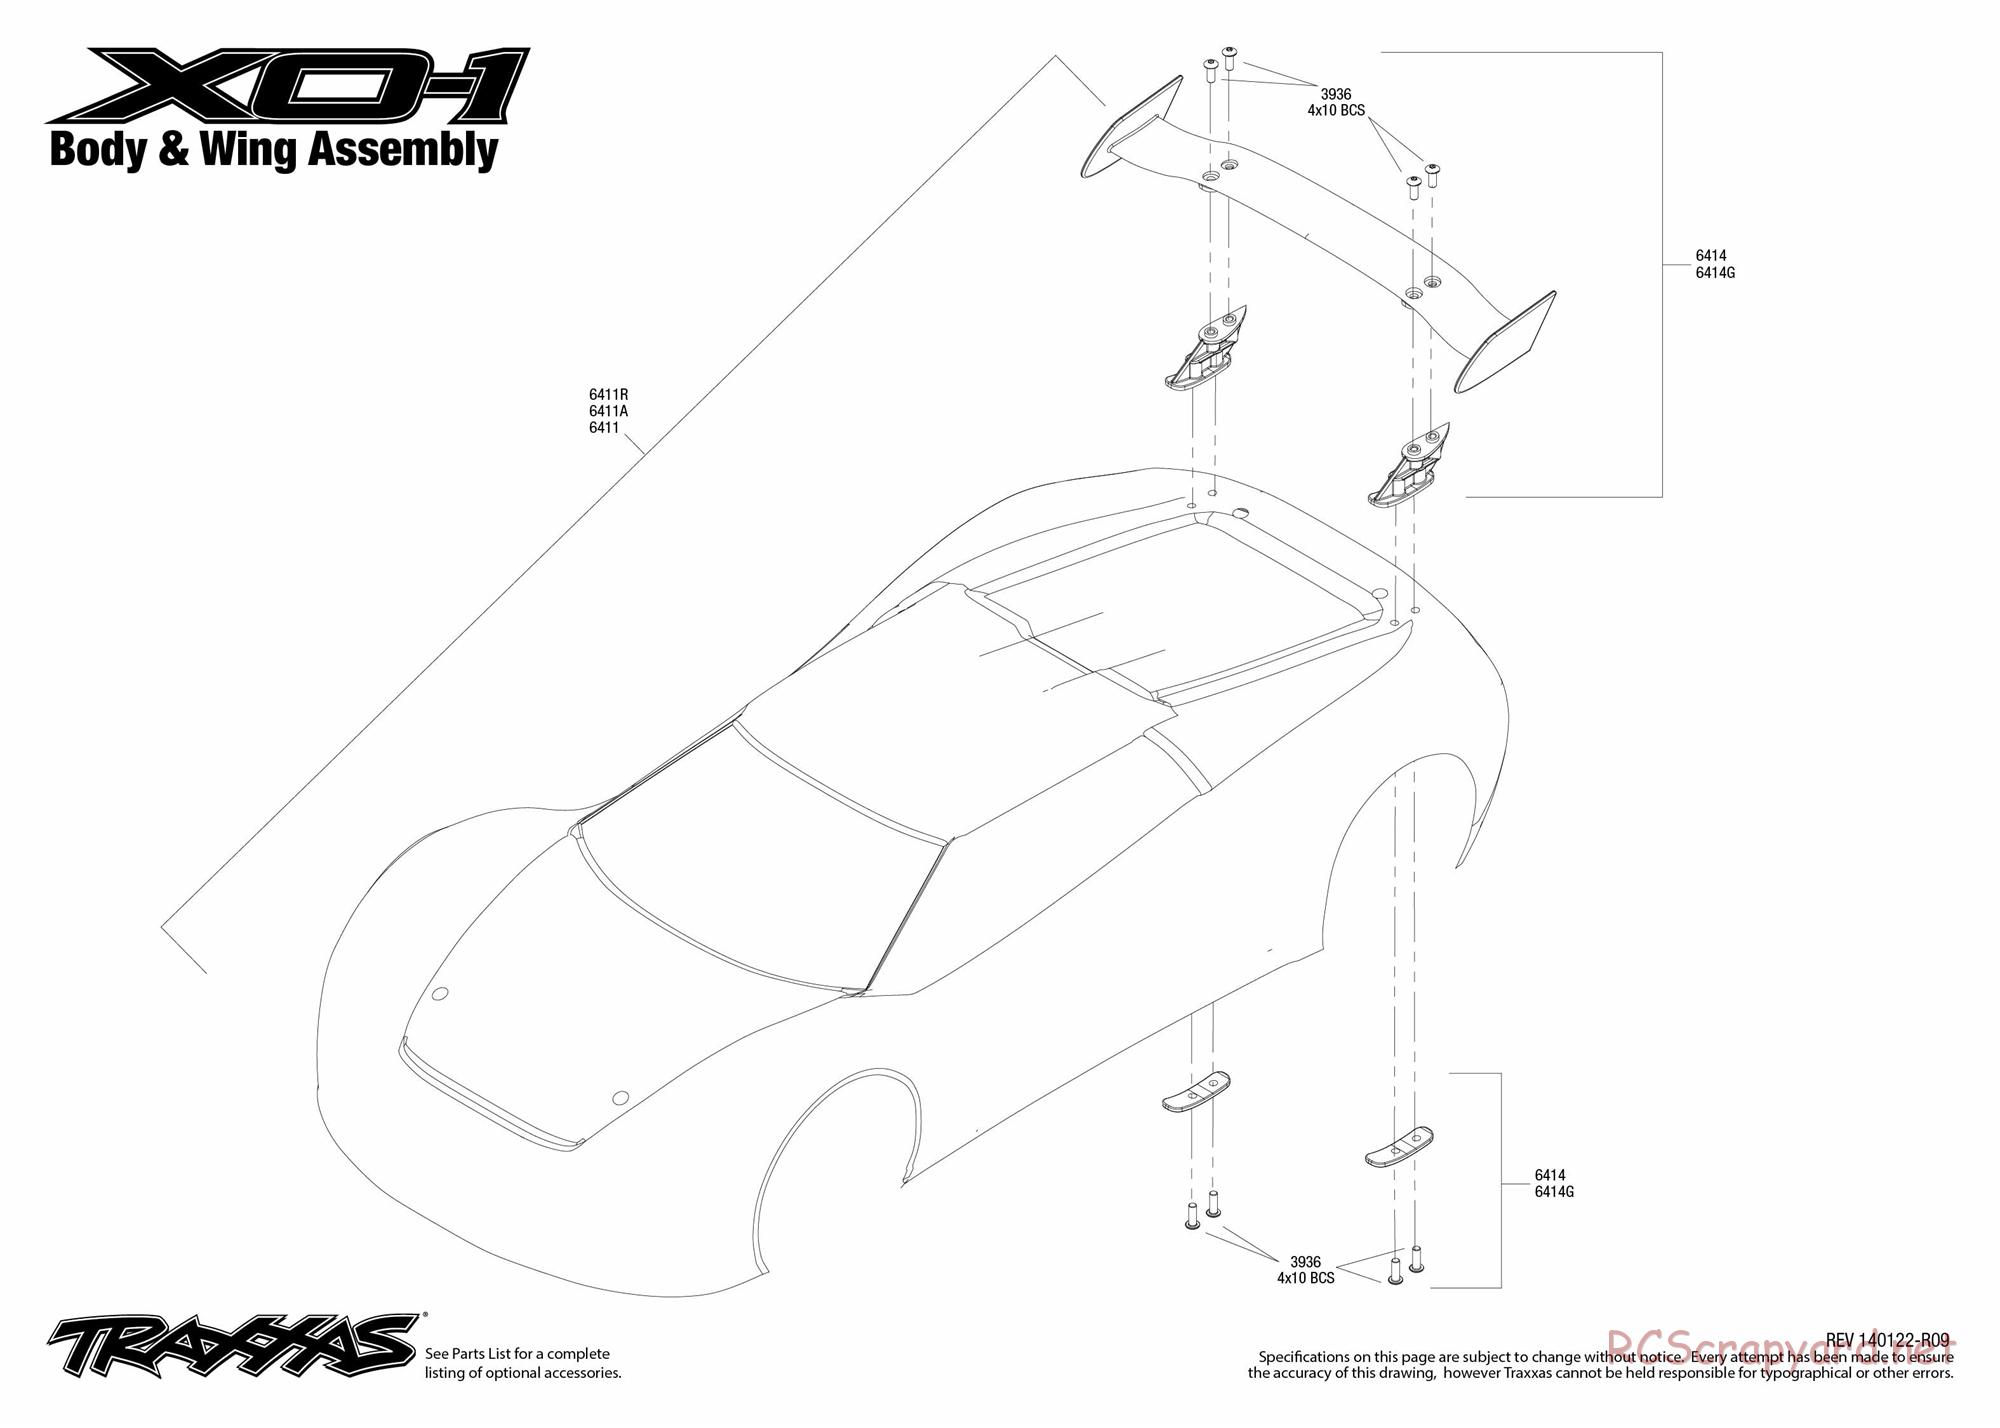 Traxxas - XO-1 (2014) - Exploded Views - Page 1